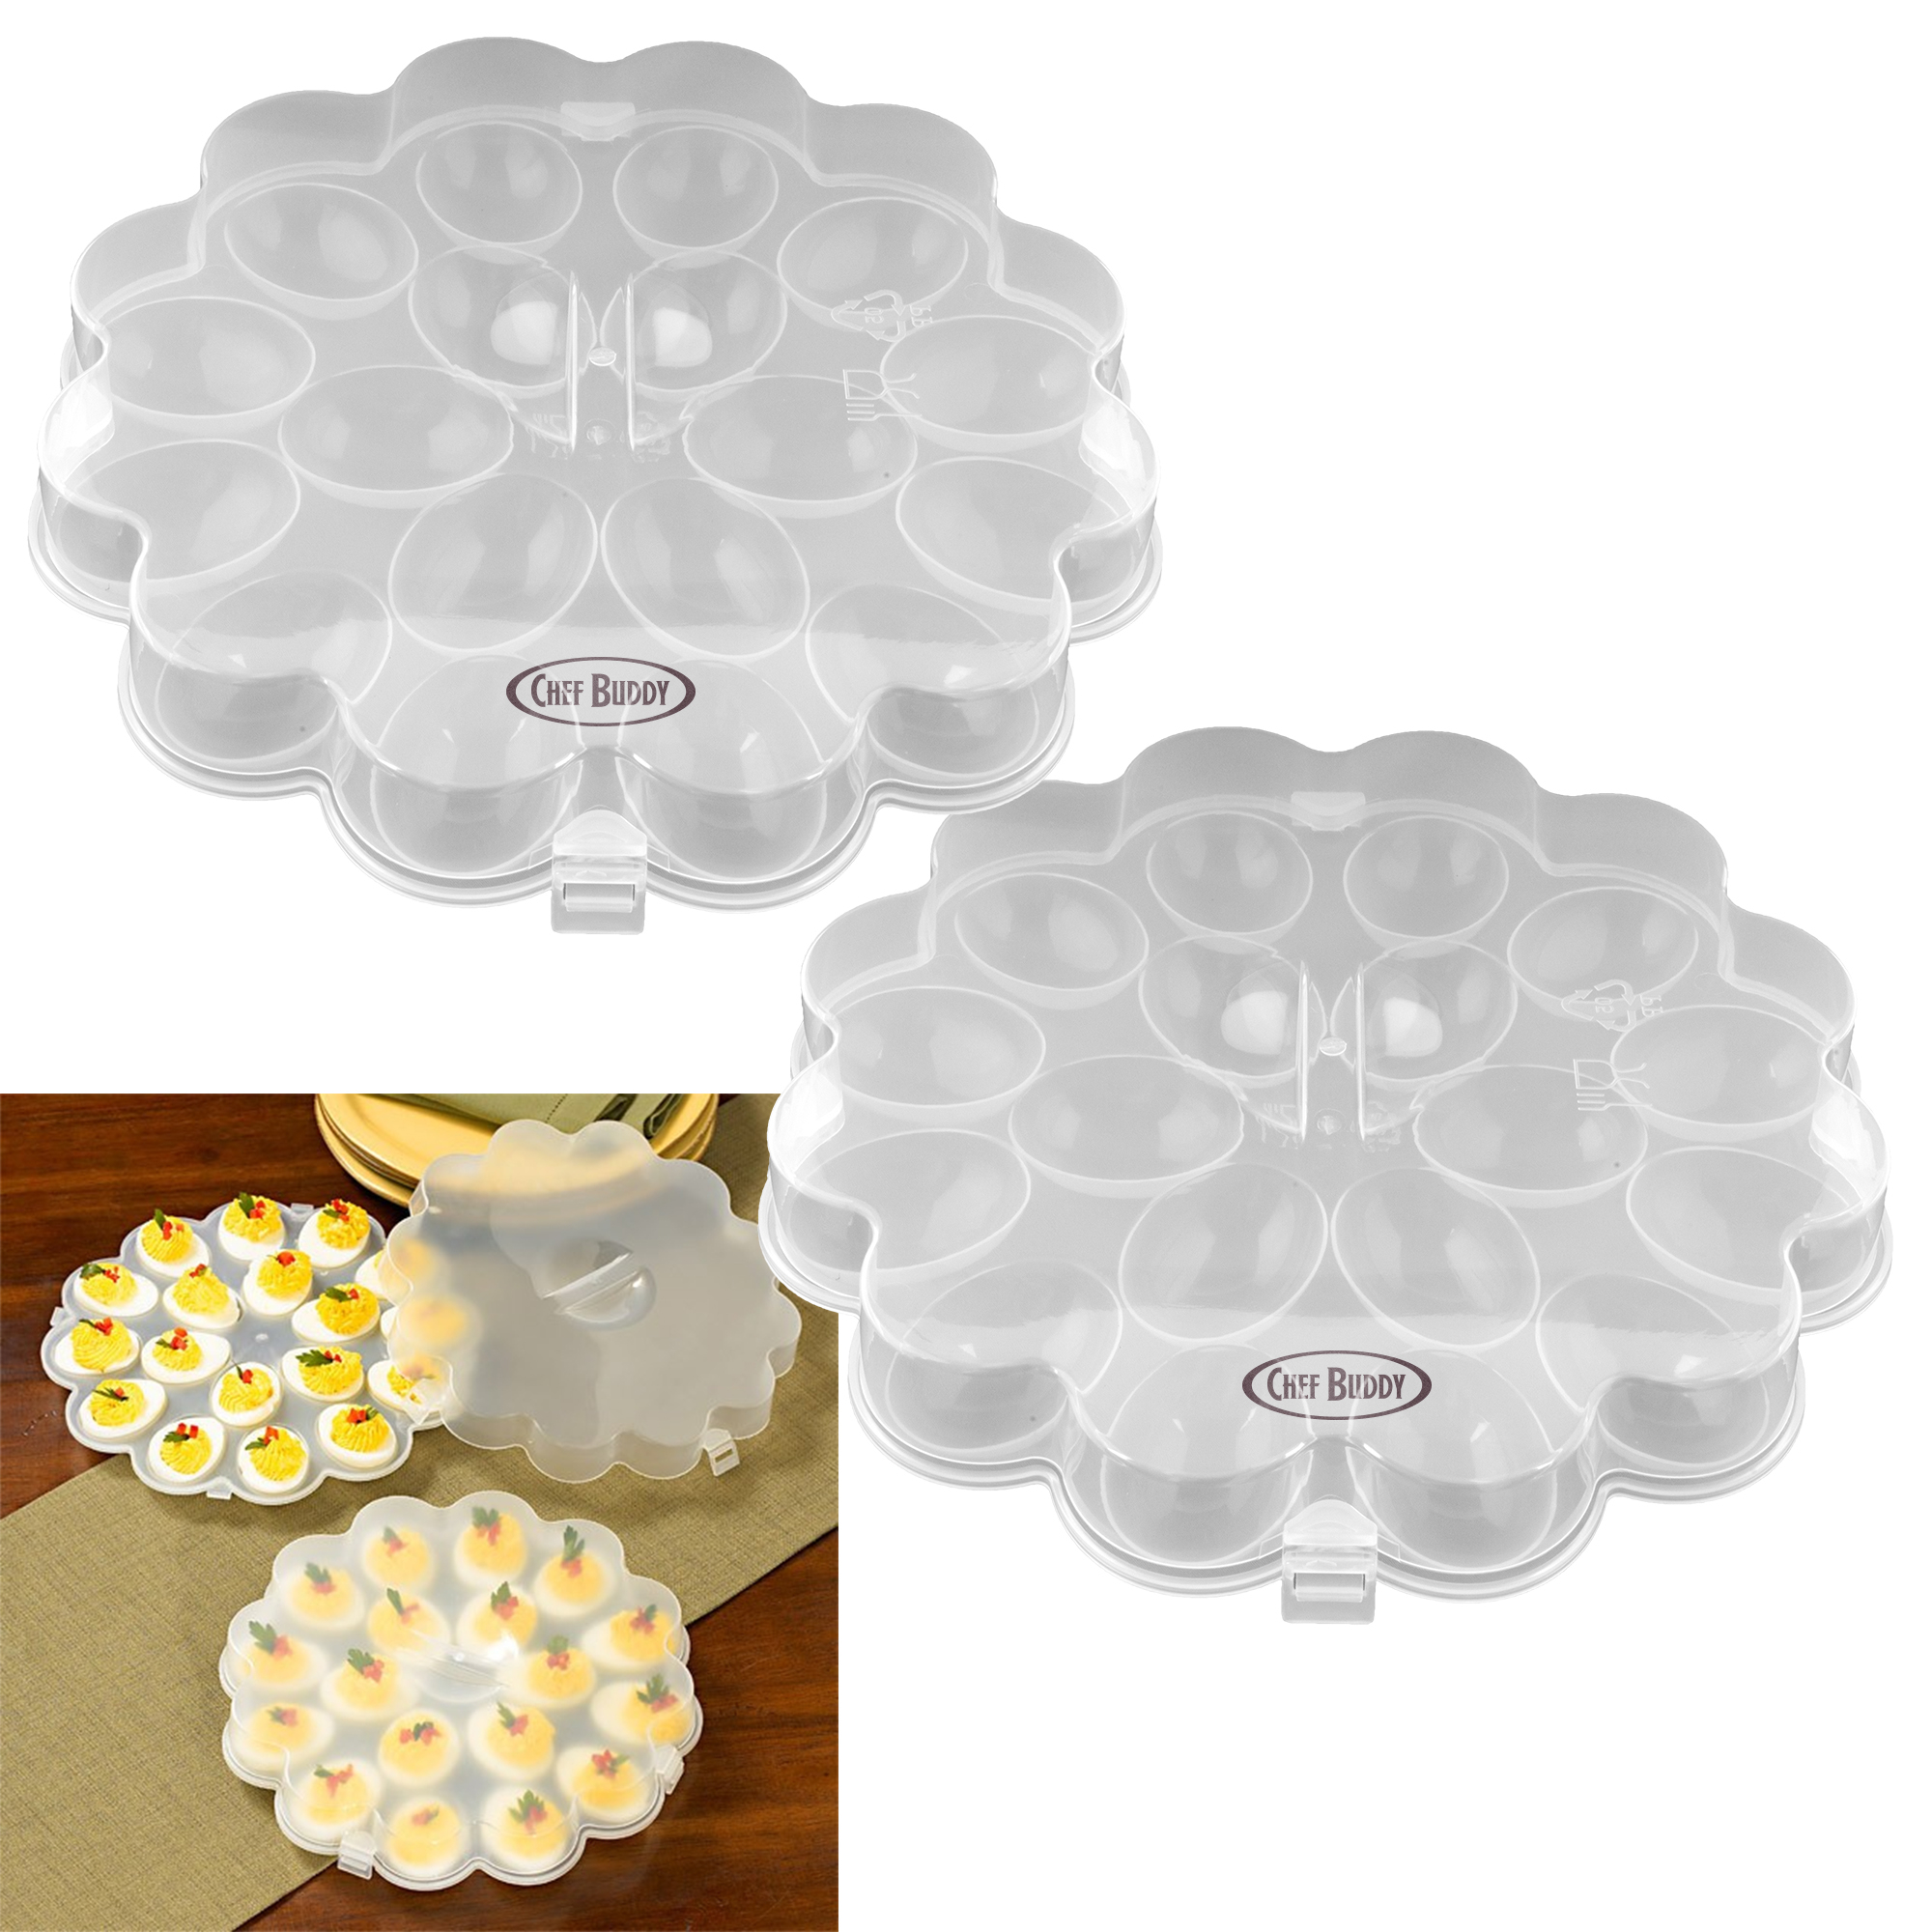 Set of 2 Deviled Egg Trays w/ Snap On Lids - Holds 36 Eggs